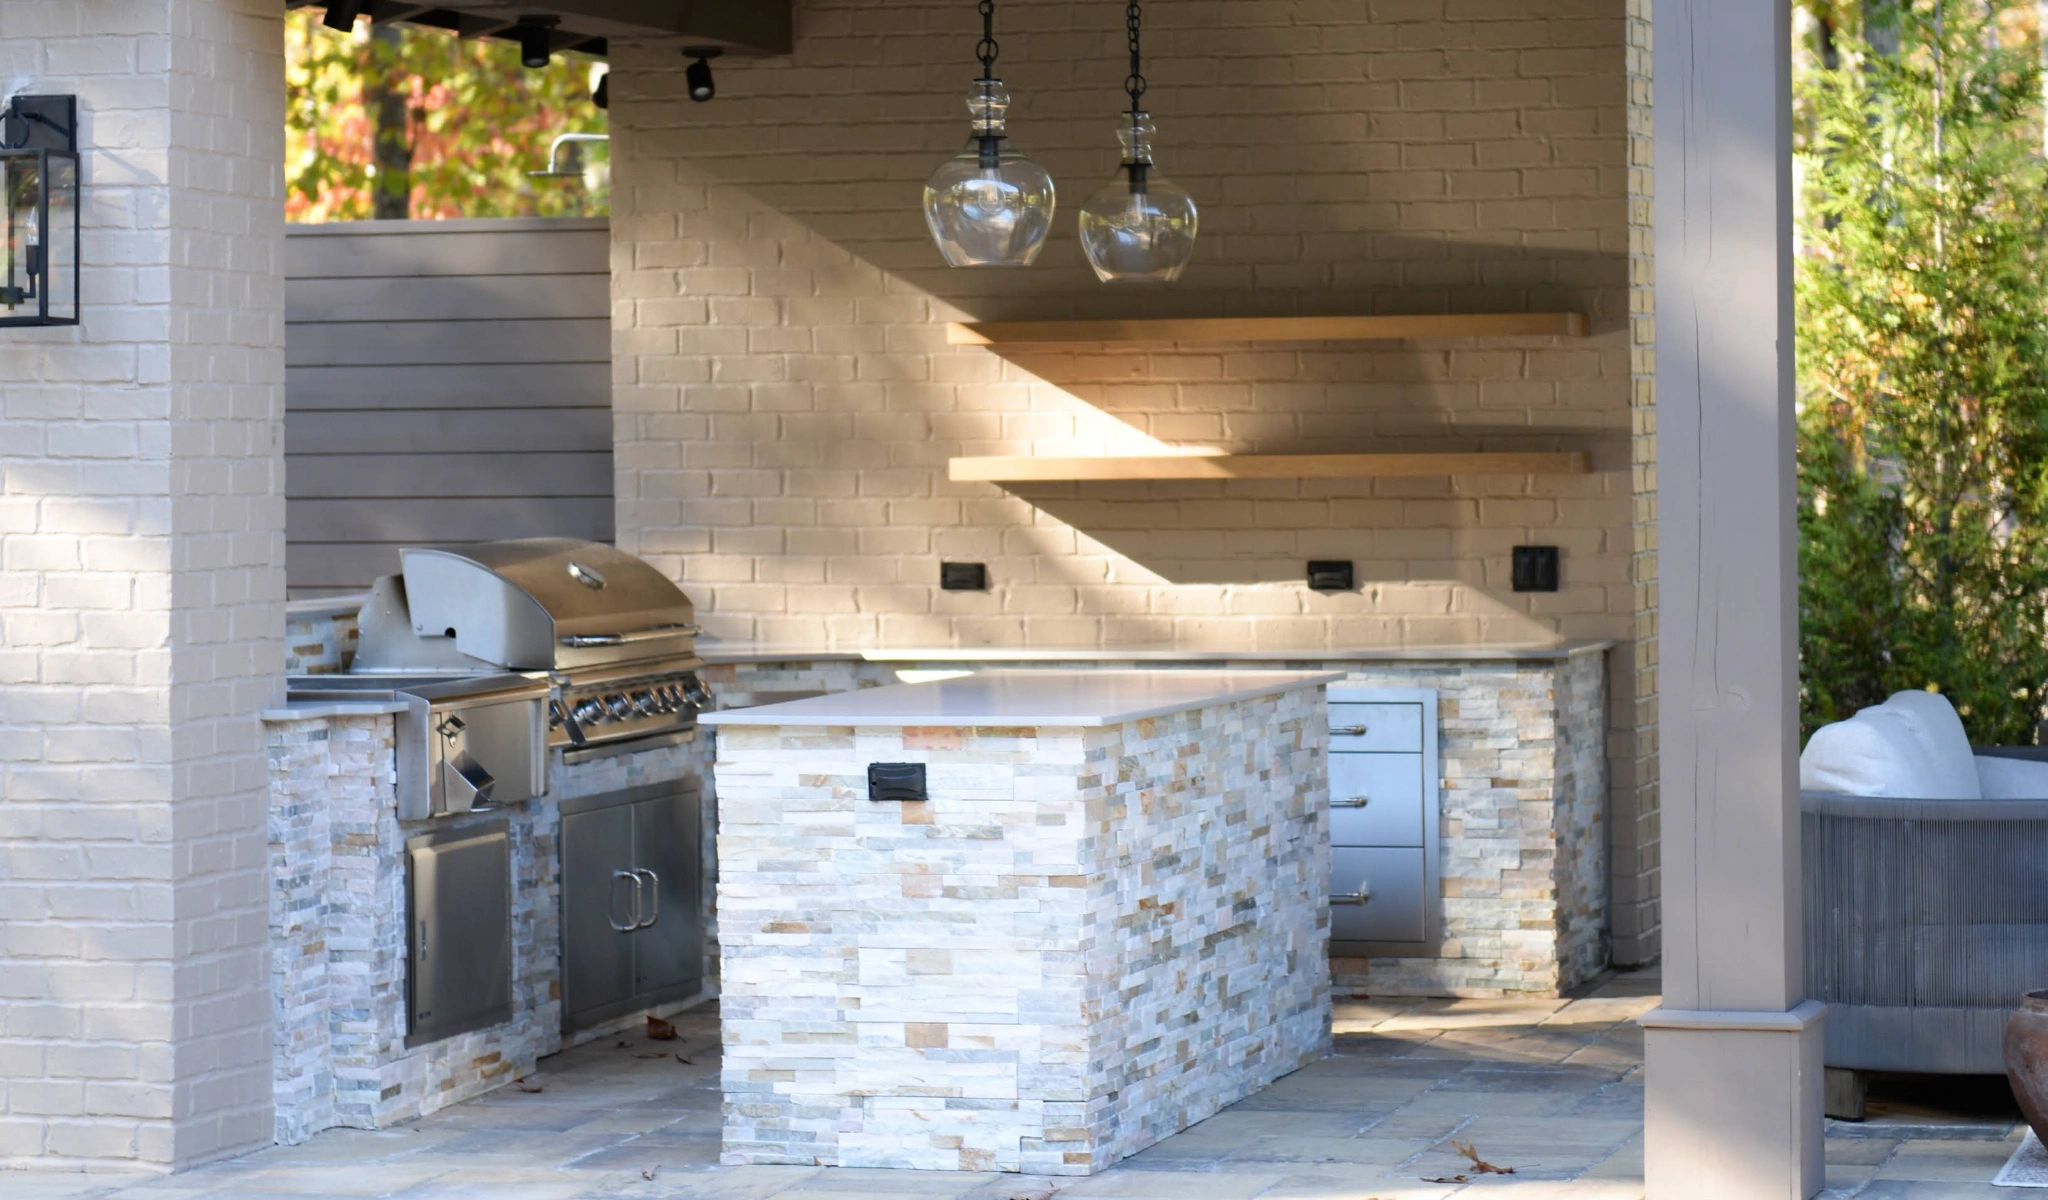 A custom-built outdoor kitchen with a grill.